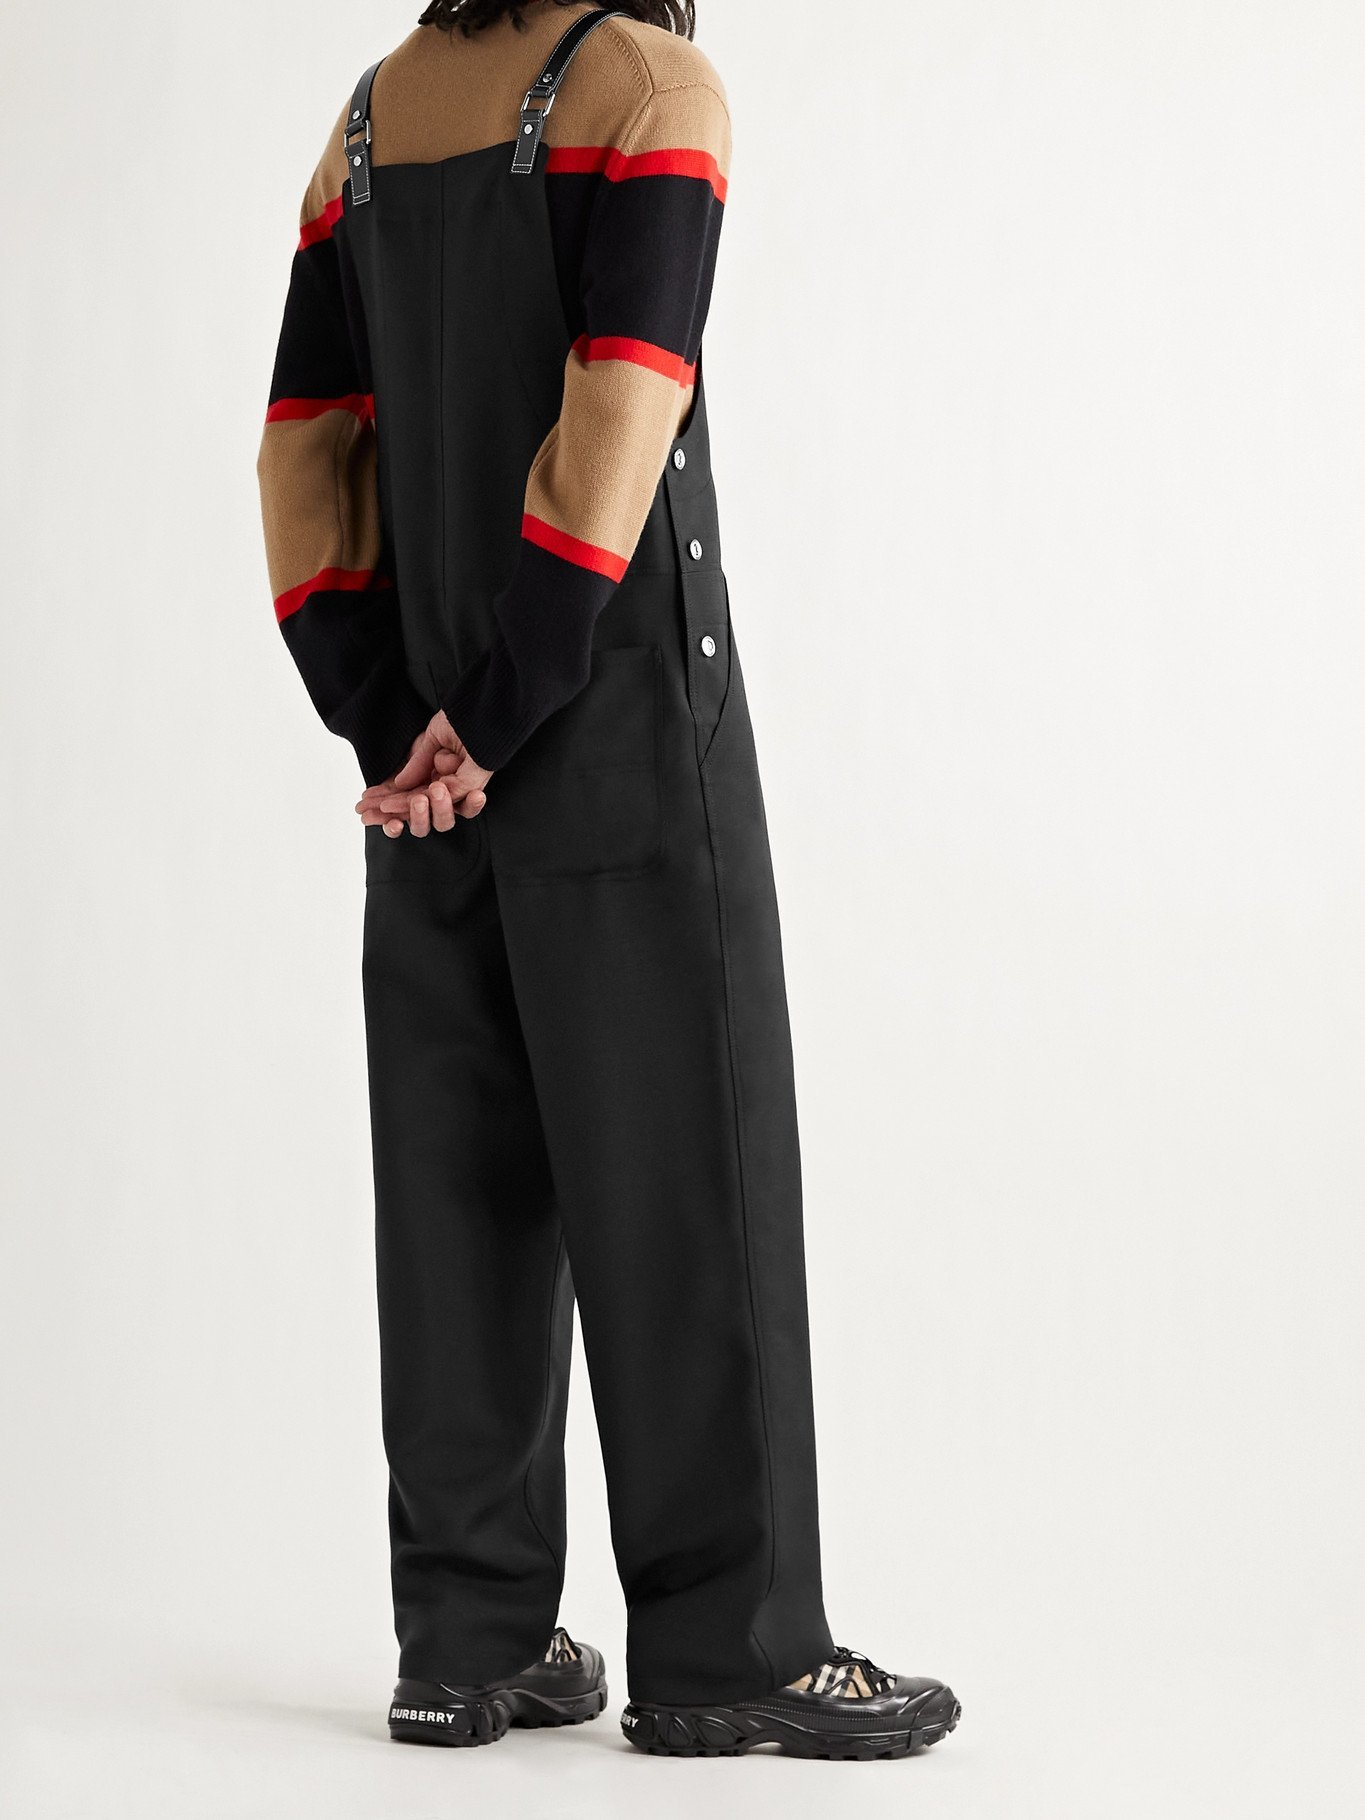 BURBERRY - Leather-Trimmed Mohair and Virgin Wool-Blend Overalls - Black -  IT 46 Burberry